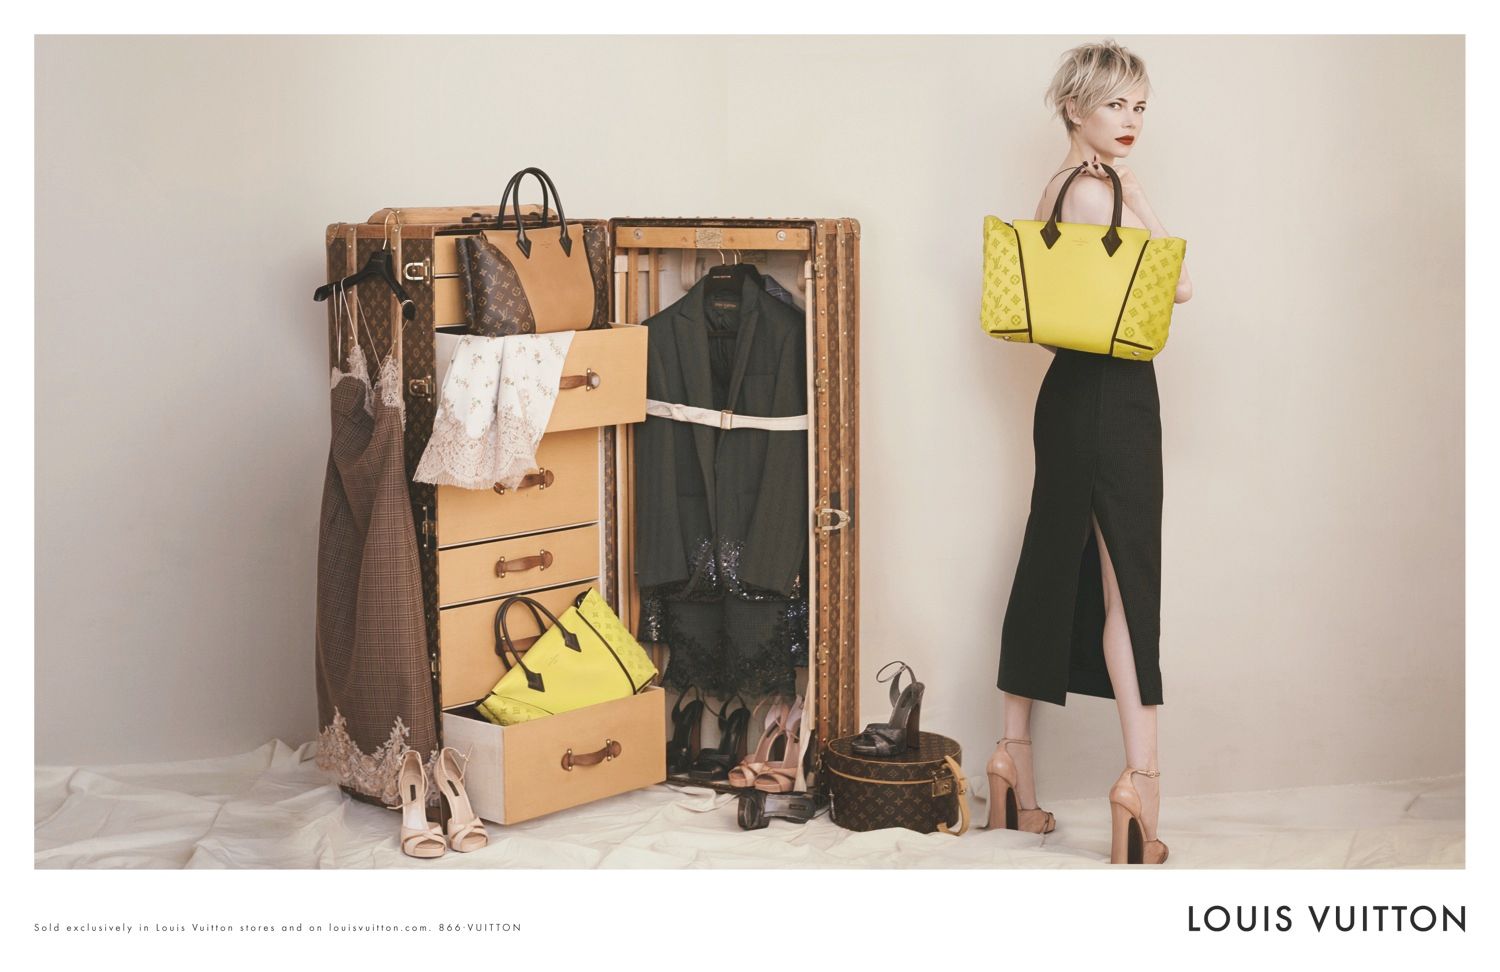 Louis Vuitton's Autumn/Winter 2013 print ad featuring Michelle Williams and the 'W' tote (Photo courtesy | Louis Vuitton)